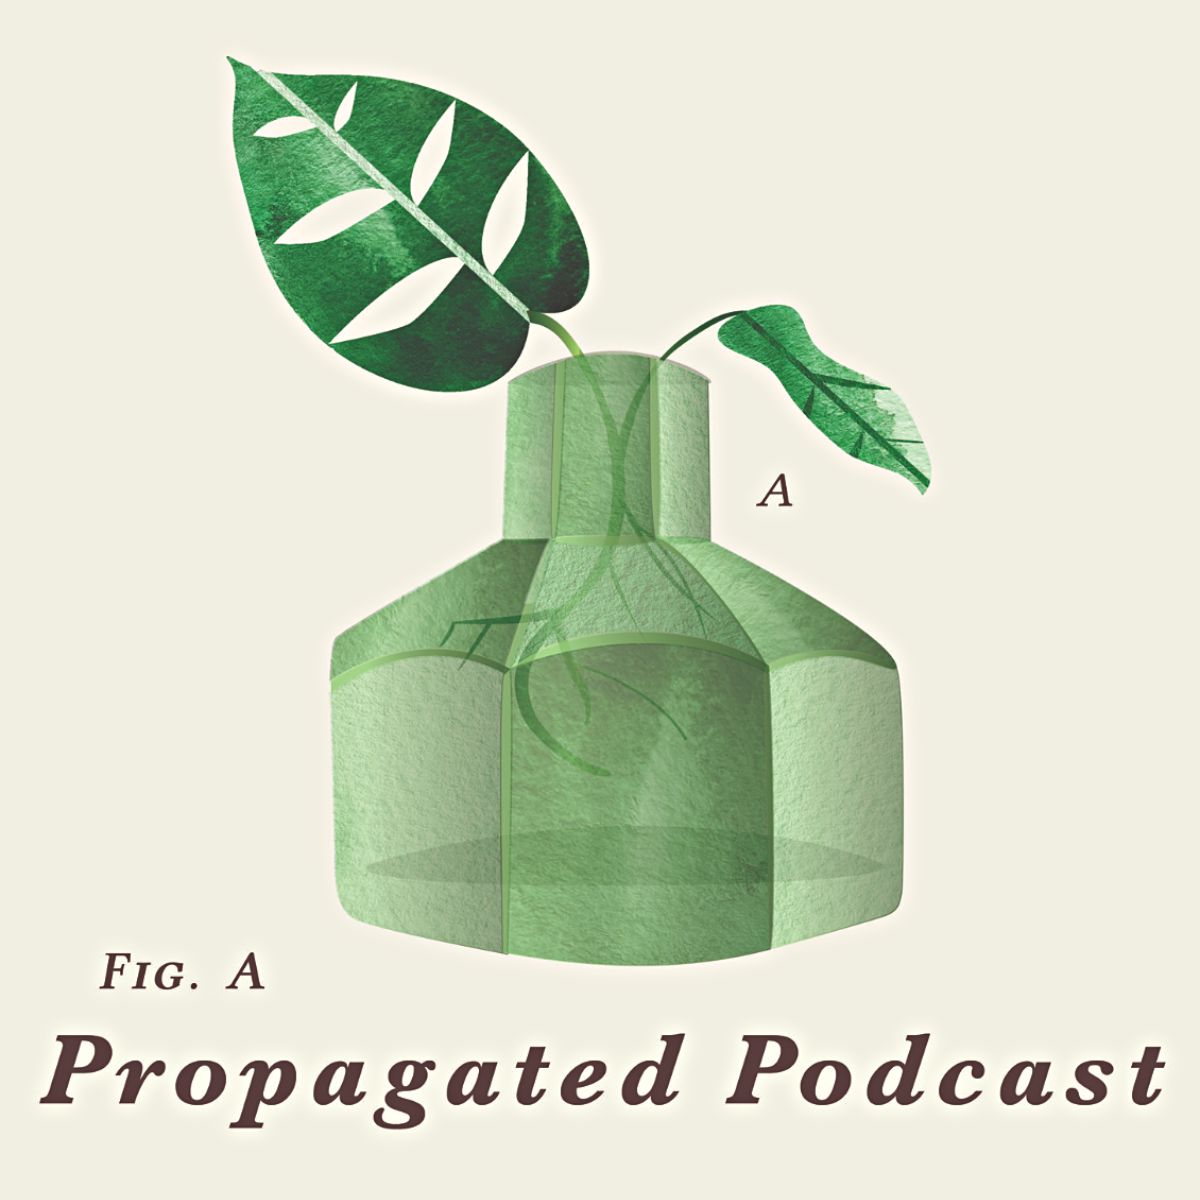 Best Plant Podcasts 2022 - propagated podcast logo